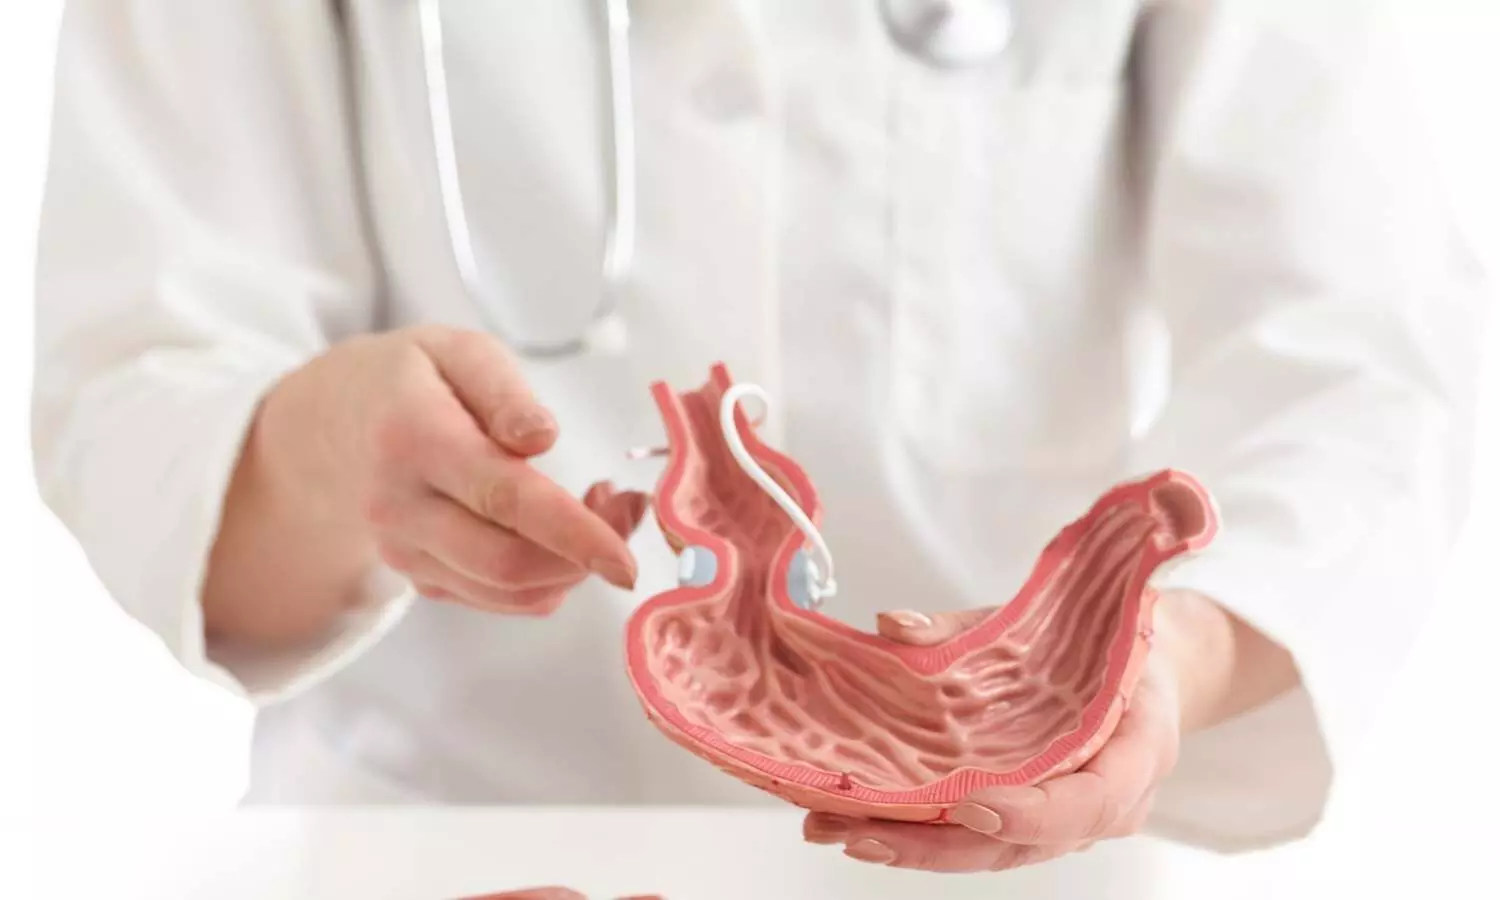 Both gastric bypass and sleeve gastrectomy have similar rates of complications and death: JAMA